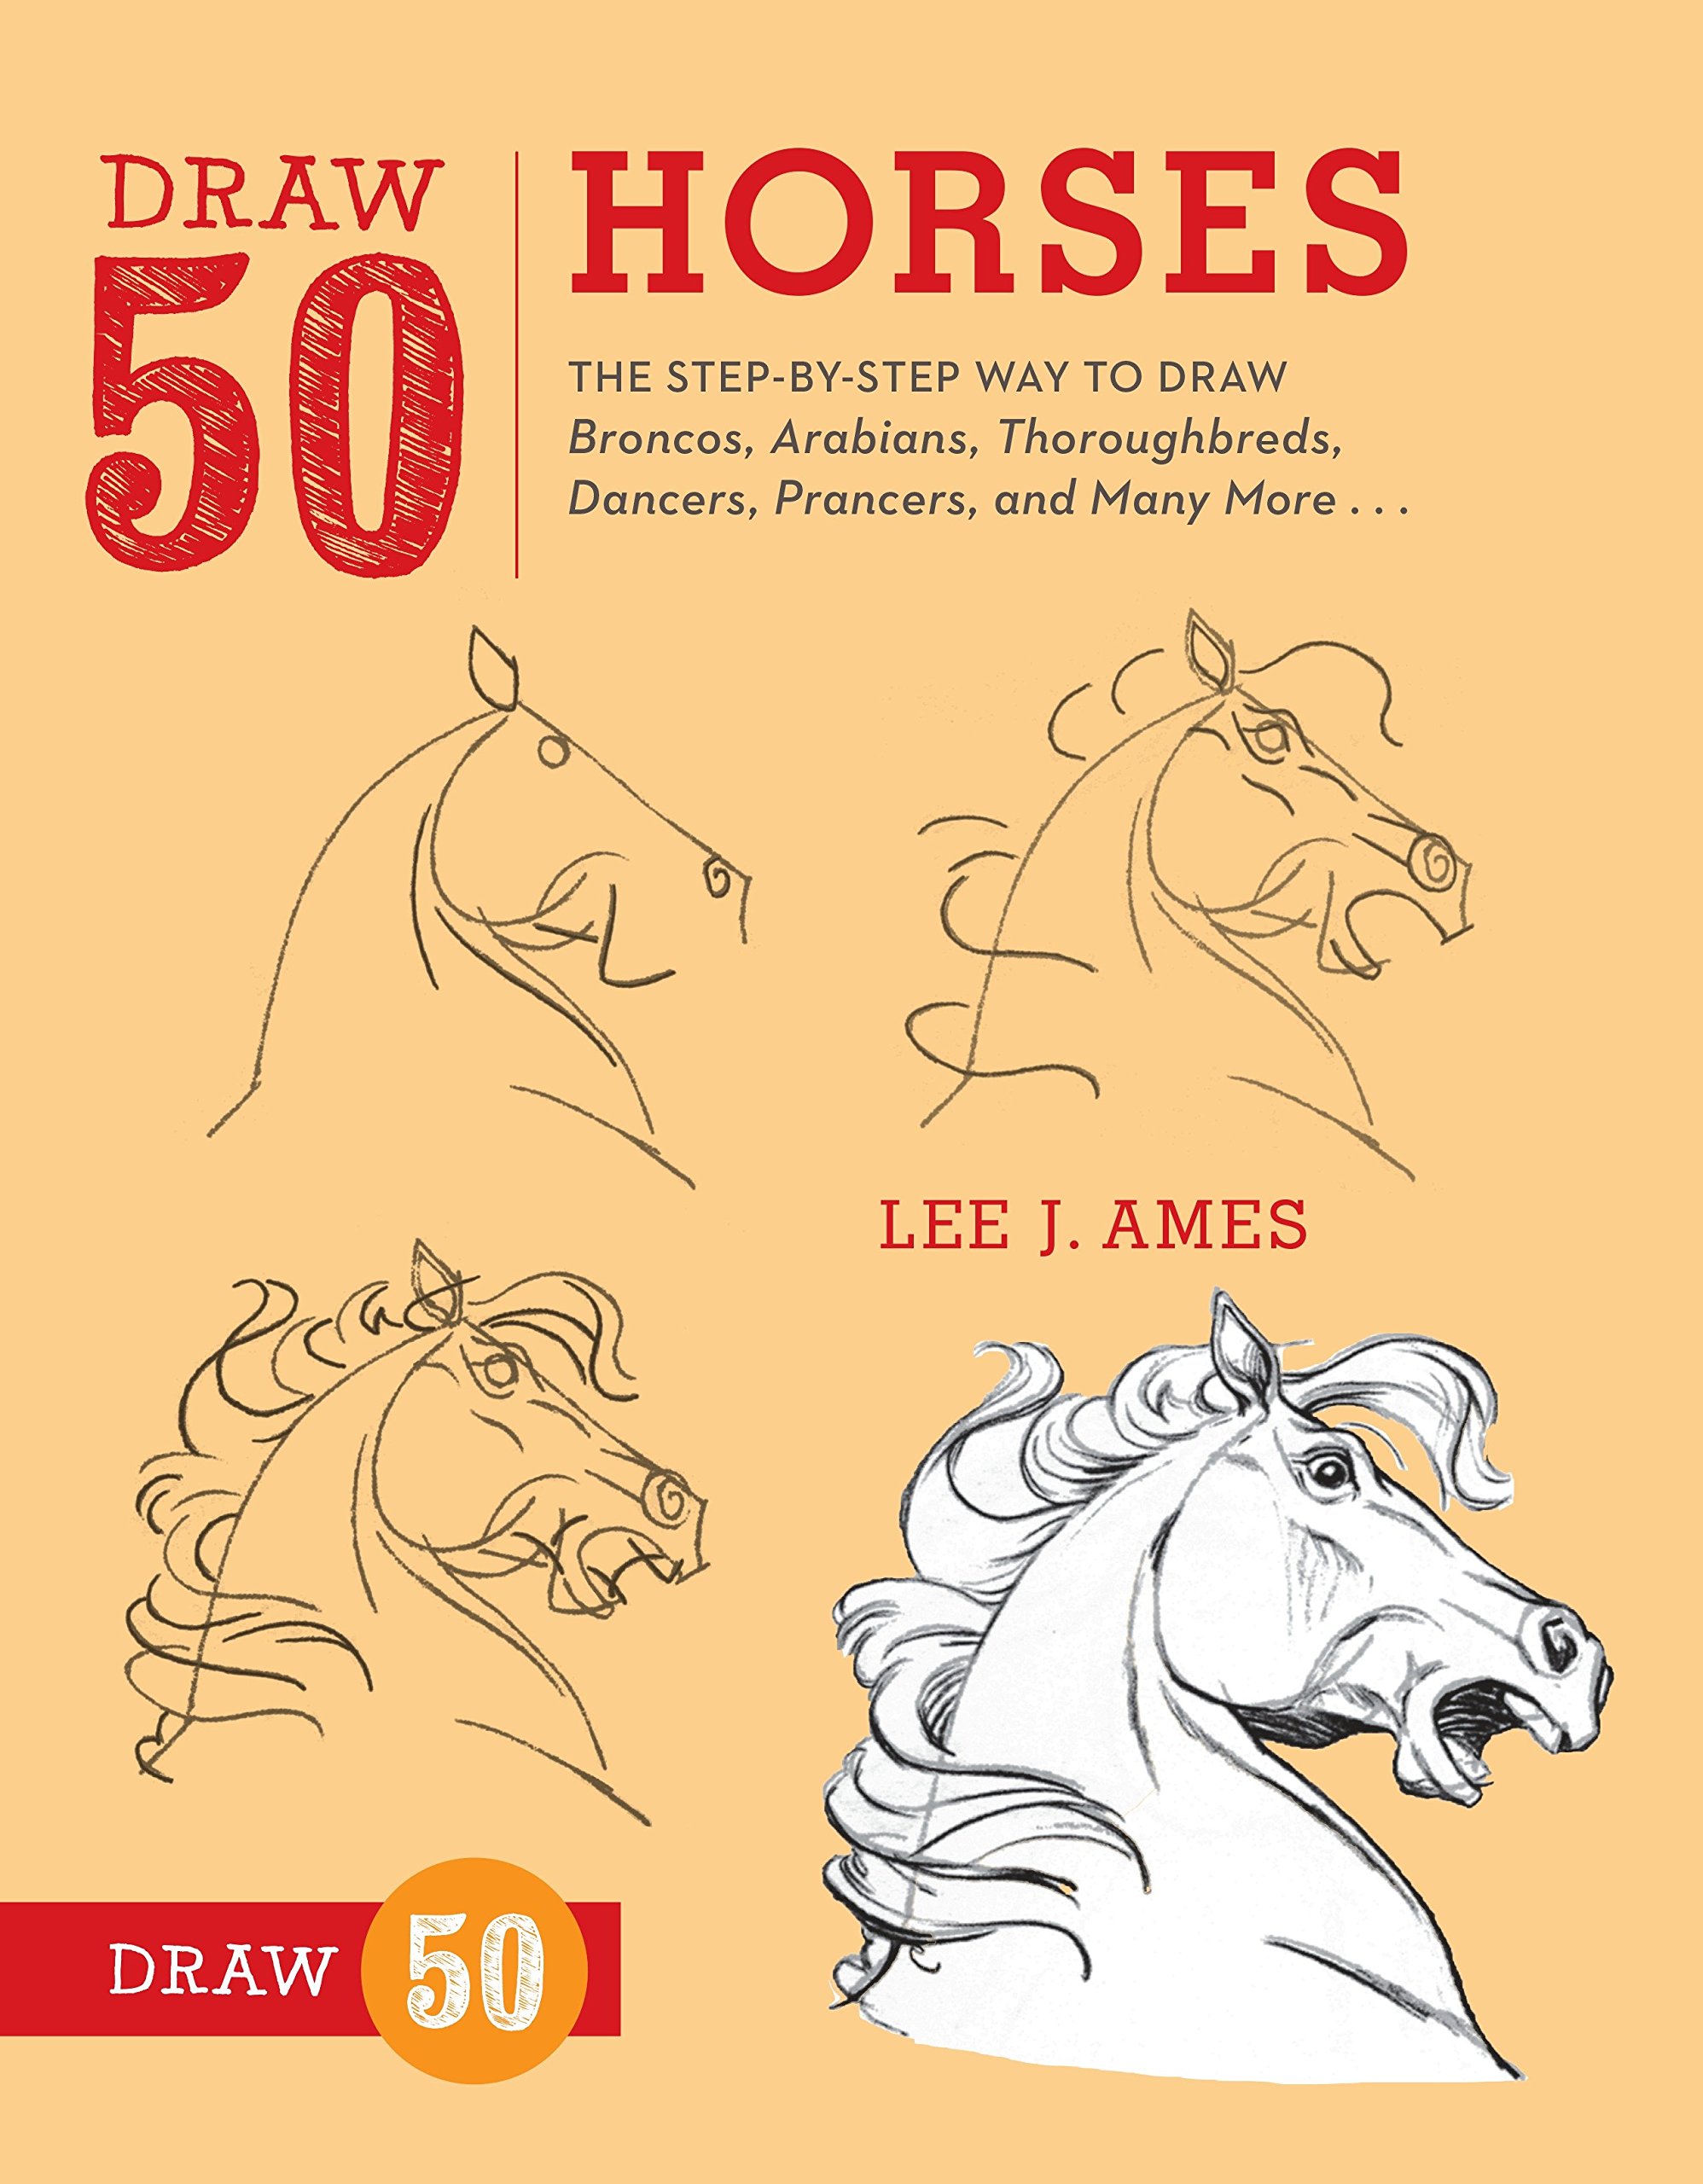 Draw 50 Horses: The Step-by-Step Way To Draw Broncos, Arabians, Thoroughbreds, Dancers, Prancers, And Many More... 
